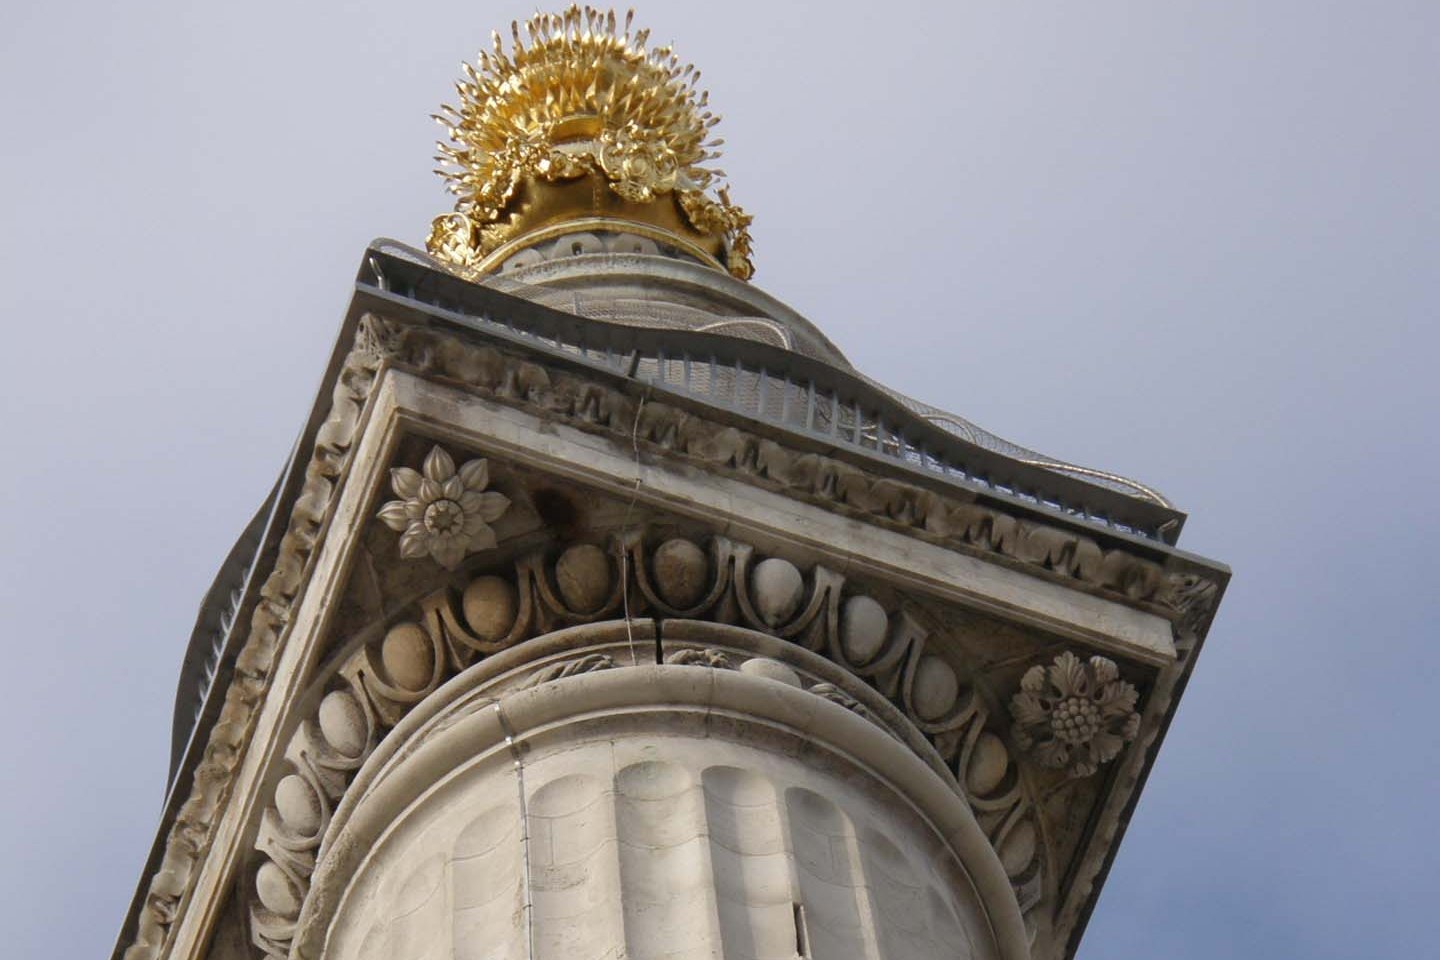 Transparent Webnet securing Monument Tower in London